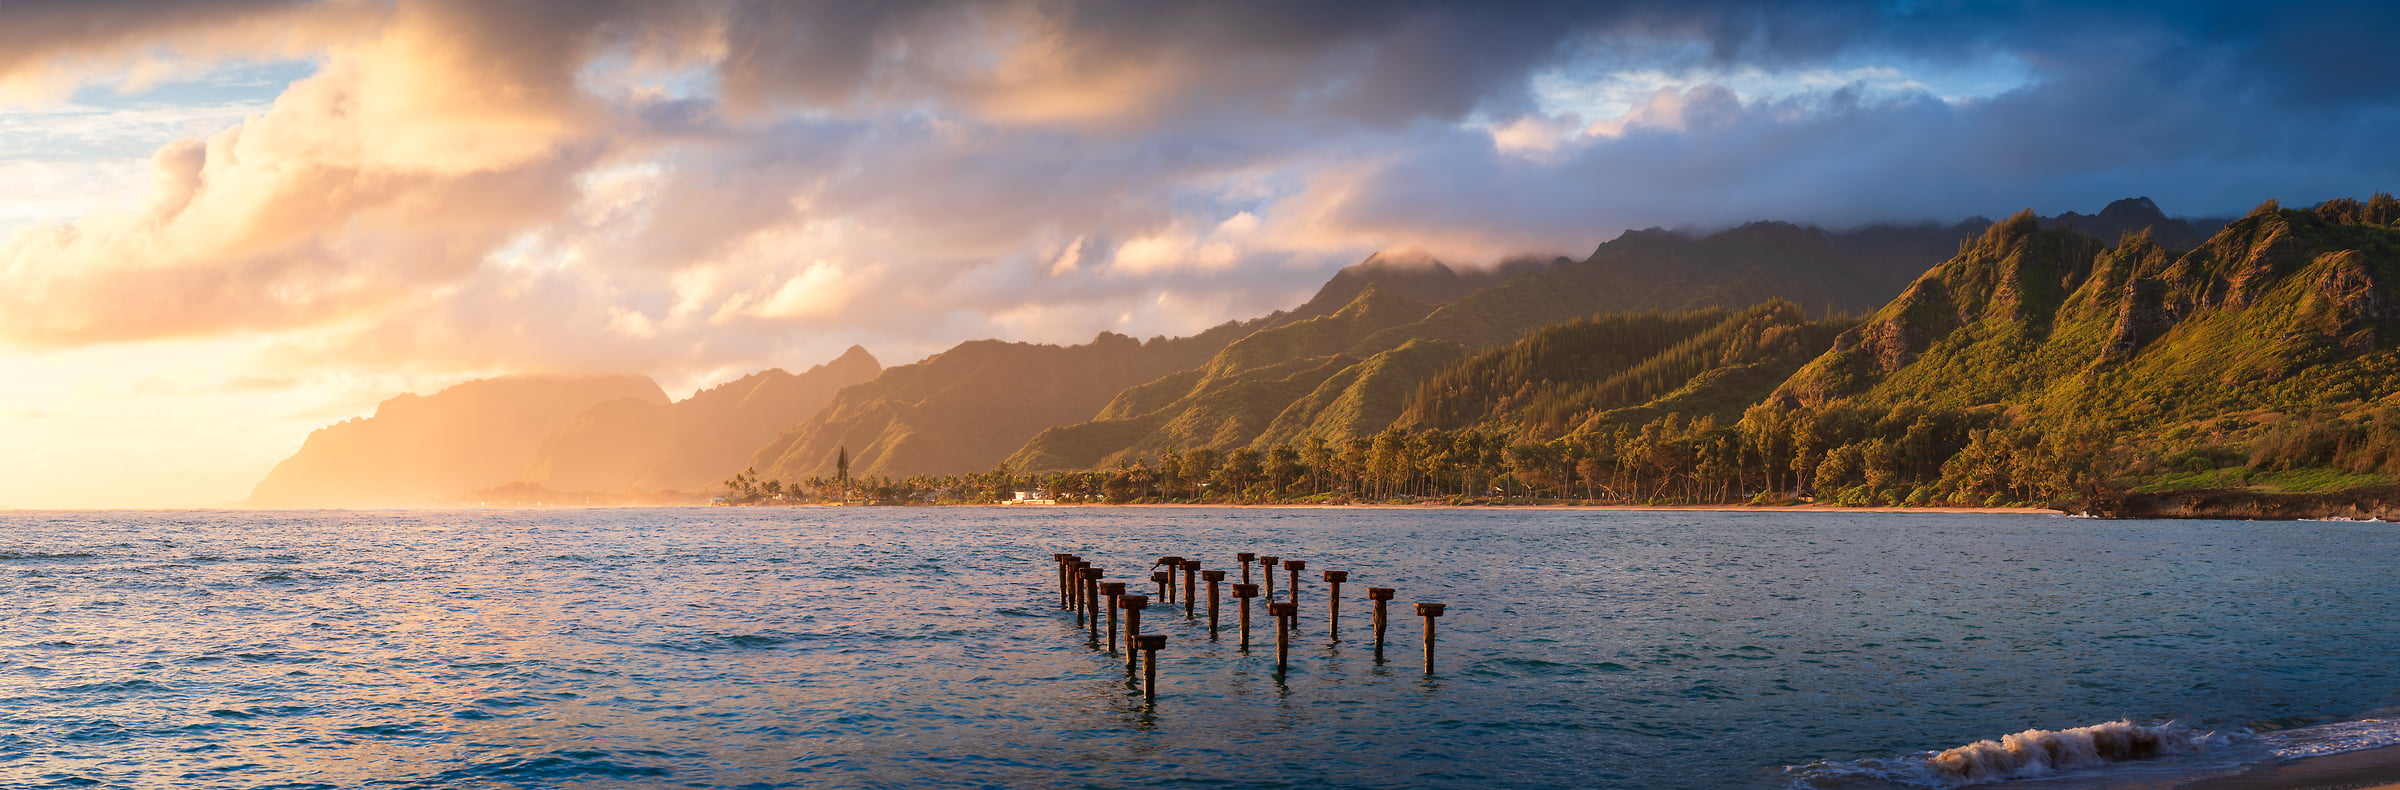 293 megapixels! A very high resolution, large-format VAST photo print of paradise - a Hawaii landscape at sunset with the ocean and mountains; landscape photograph created by Jeff Lewis in Laie, Hawaii.